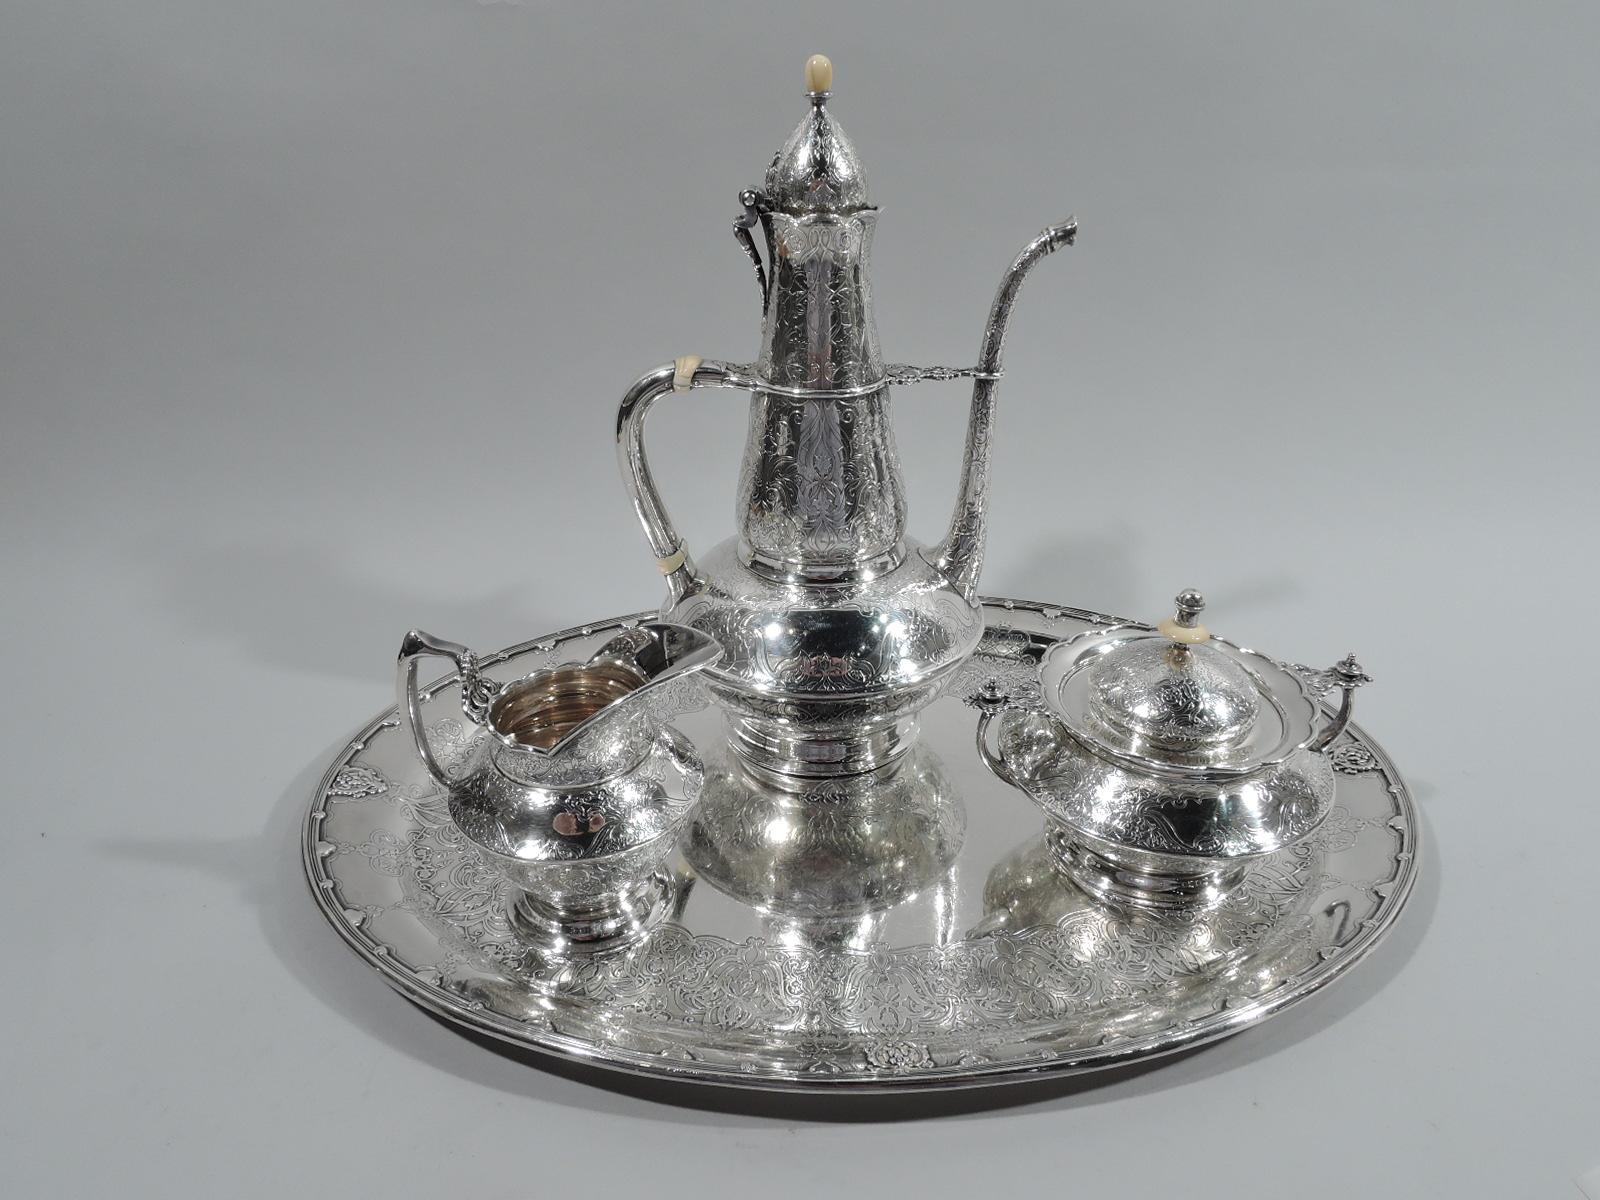 Persian sterling silver coffee set. Made by Tiffany & Co. in New York, ca 1910. This set comprises coffeepot, creamer, and sugar on tray.

Coffeepot: Bellied bowl with irregular conical neck with scalloped rim, hinged and domed cover, scrolled